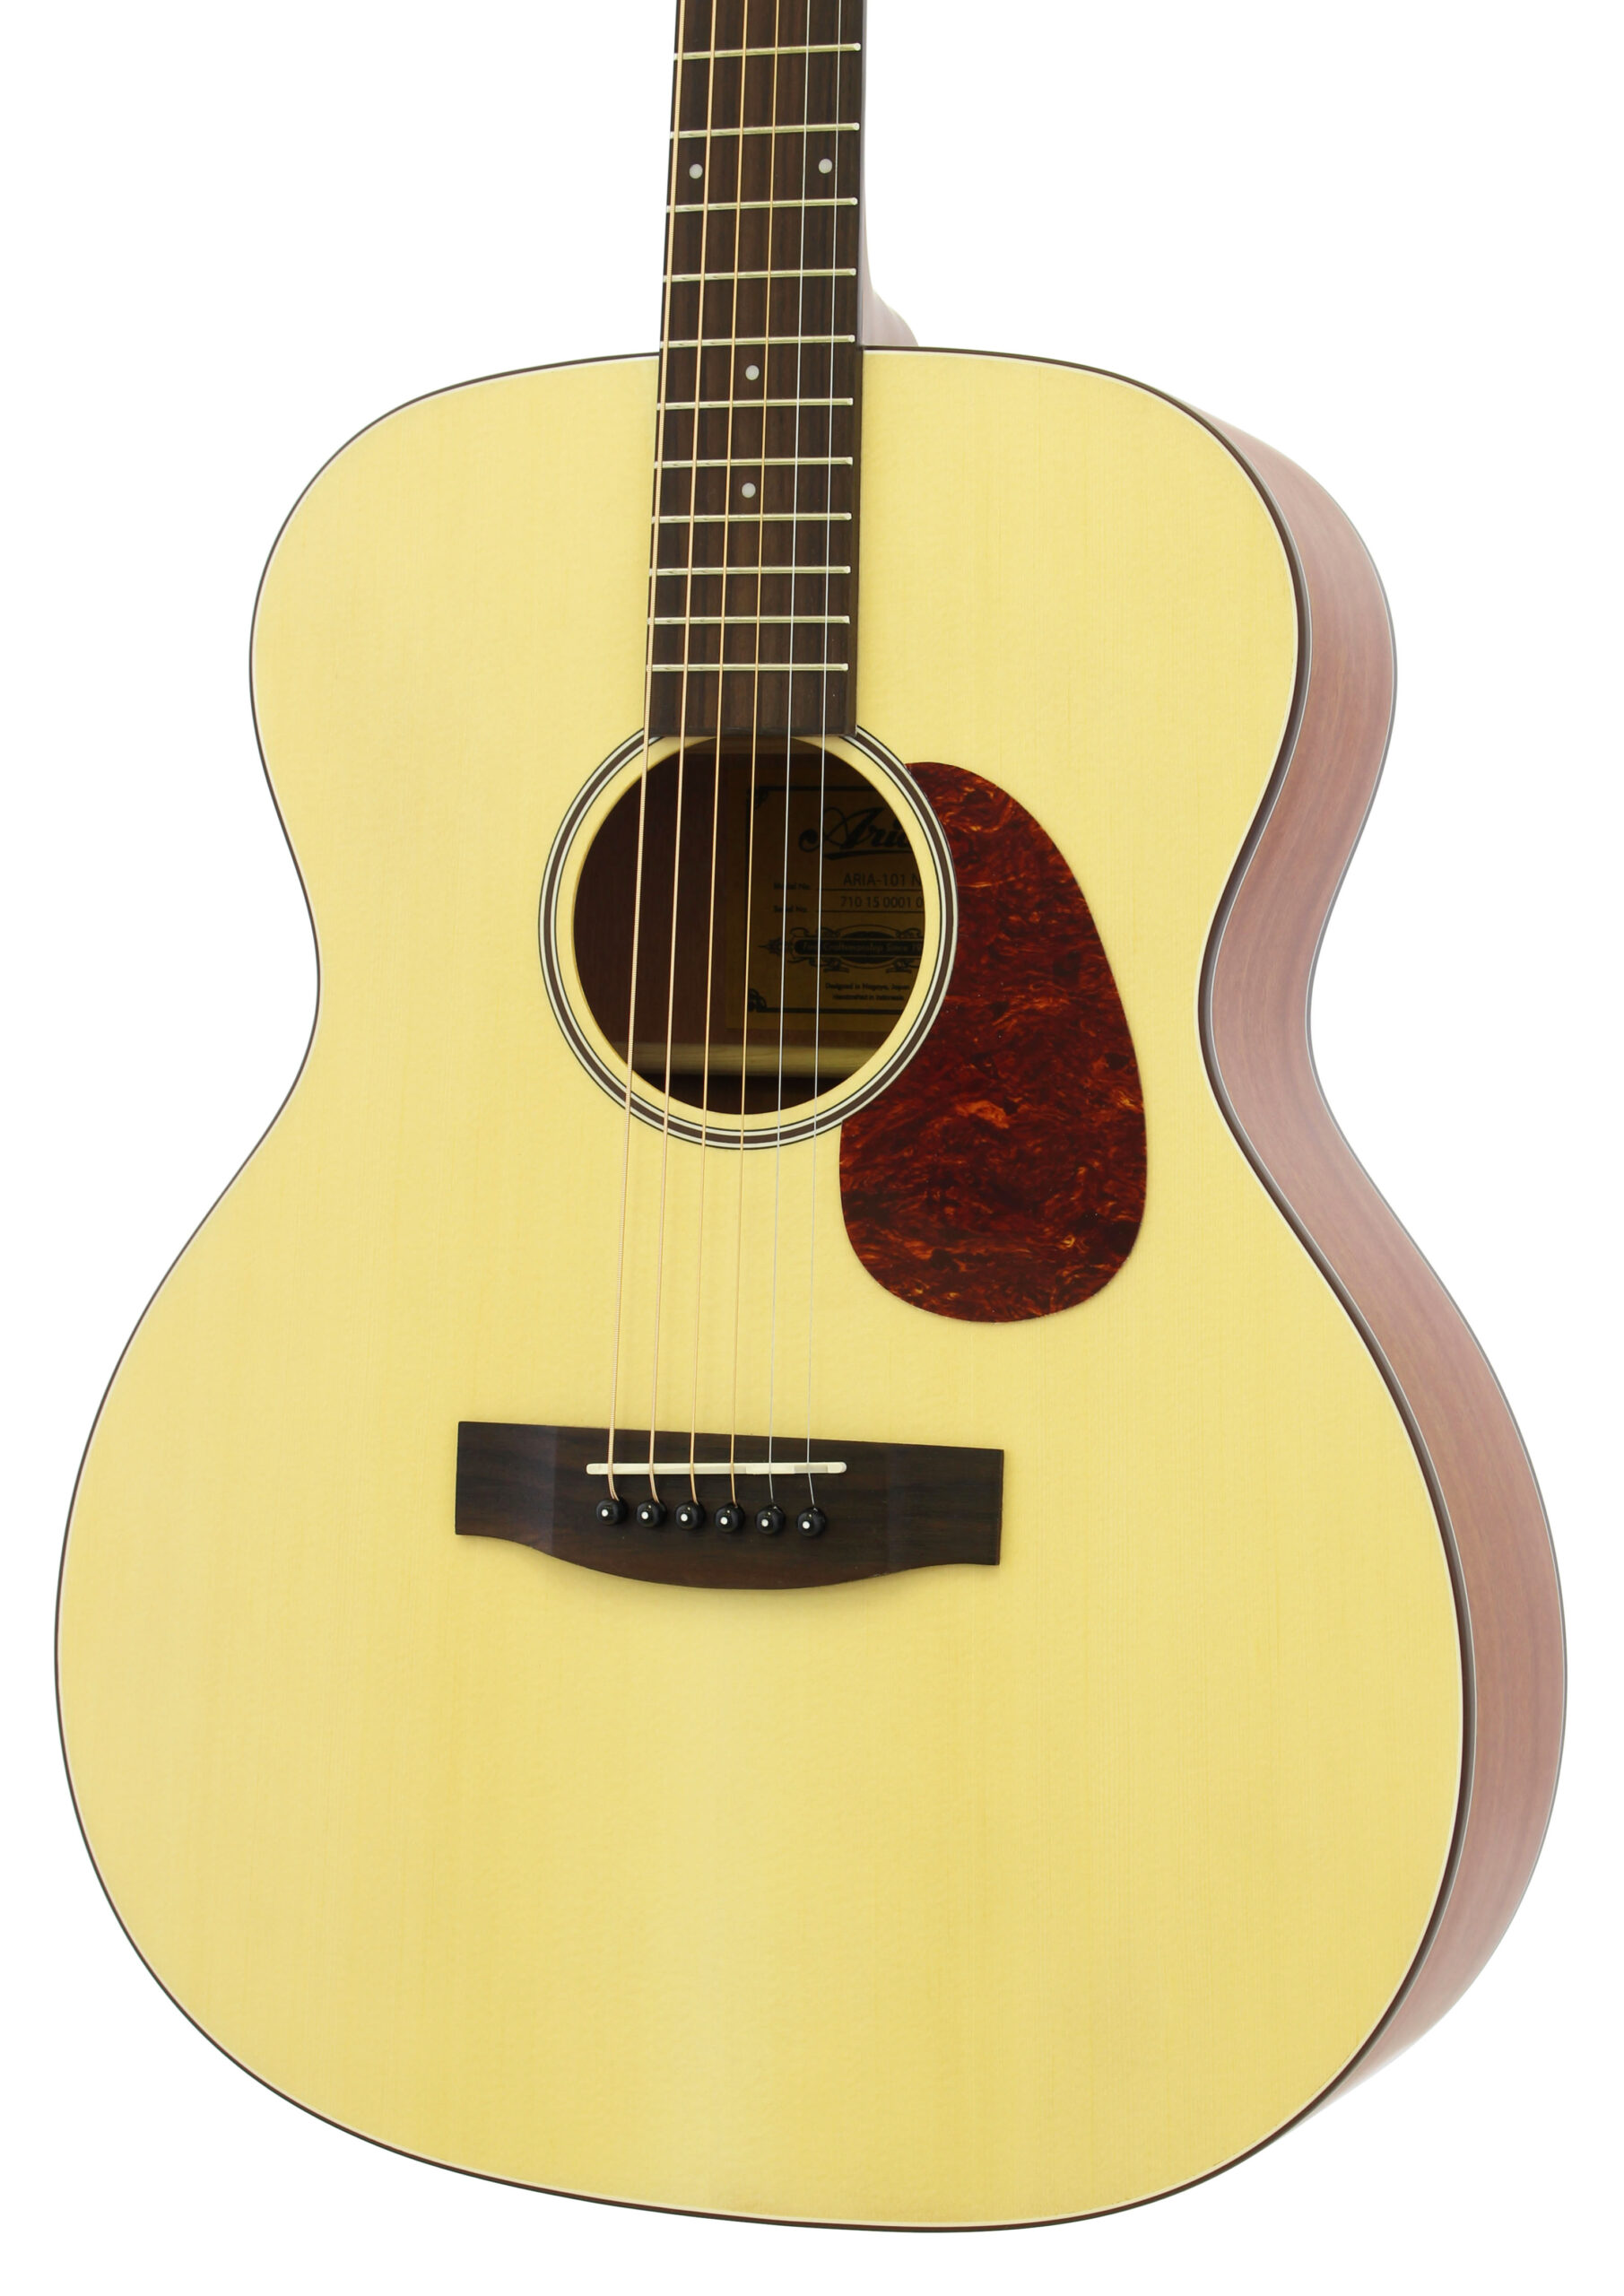 ARIA 101 ORCHESTRA SHAPE ACOUSTIC GUITAR IN MATTE NATURAL